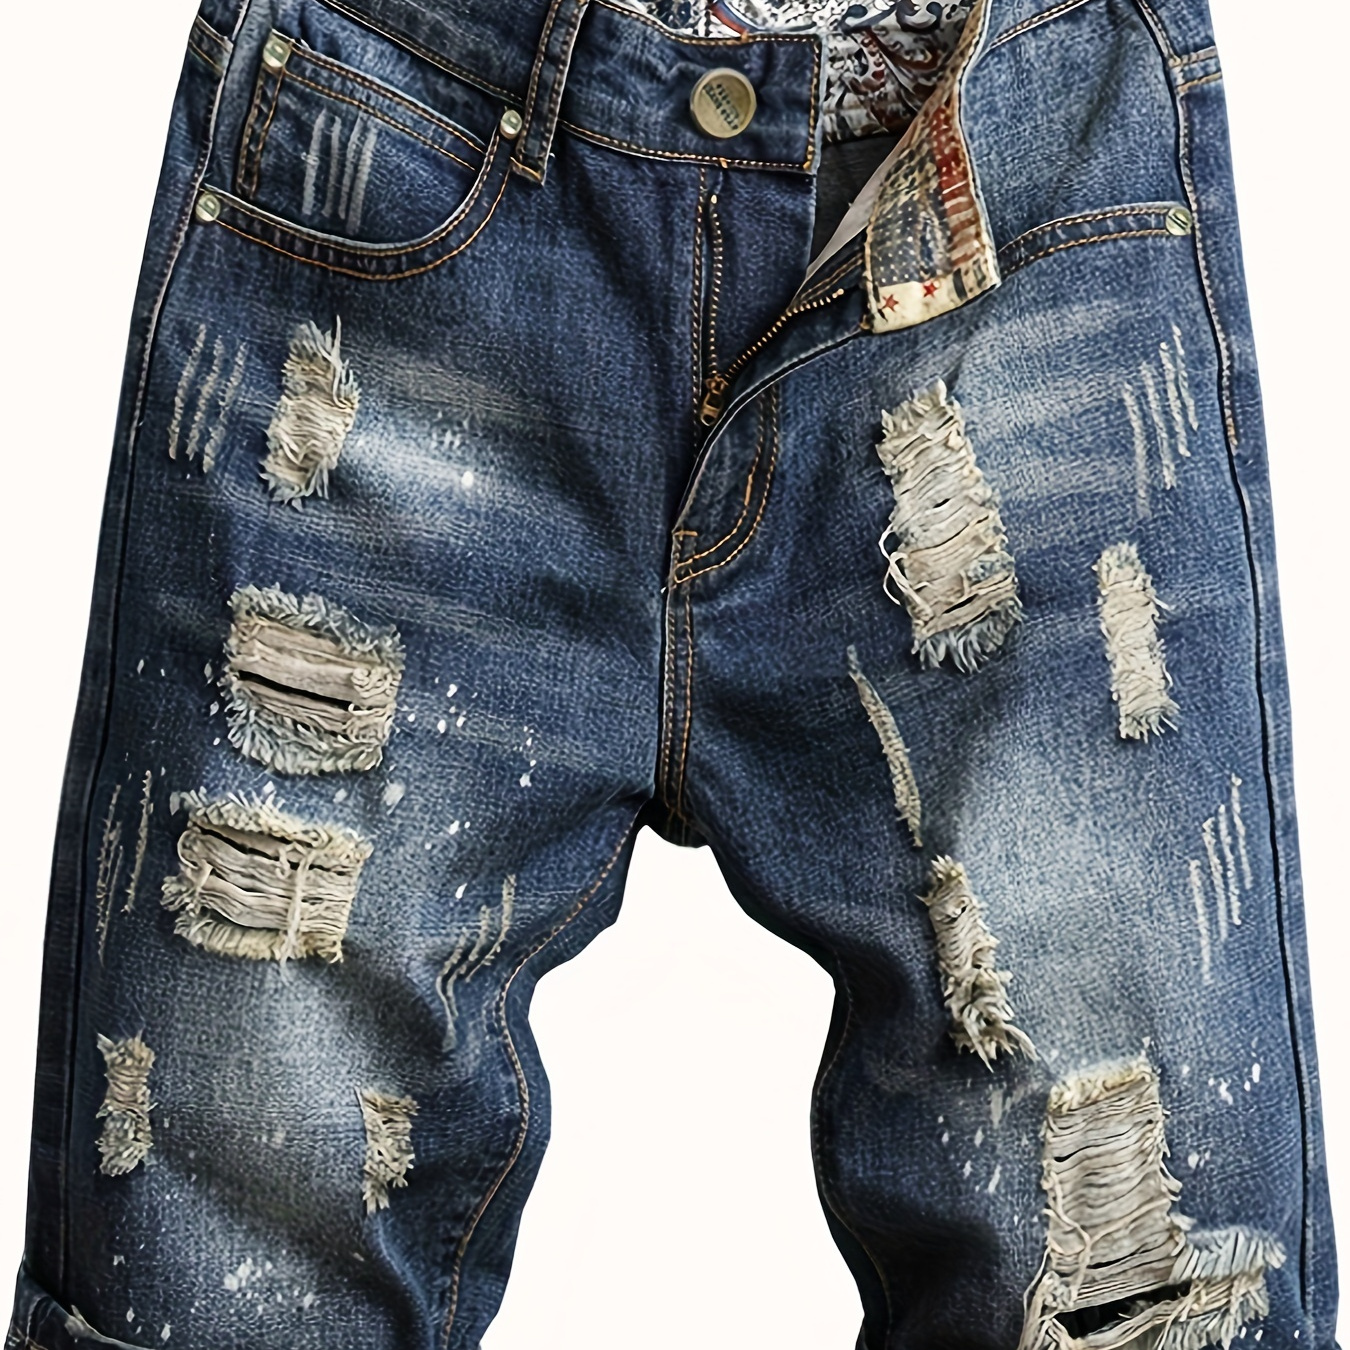 

Men's Stylish Loose Solid Ripped Denim Shorts With Pockets, Active Breathable Comfy Jeans For Summer Outdoor Activities